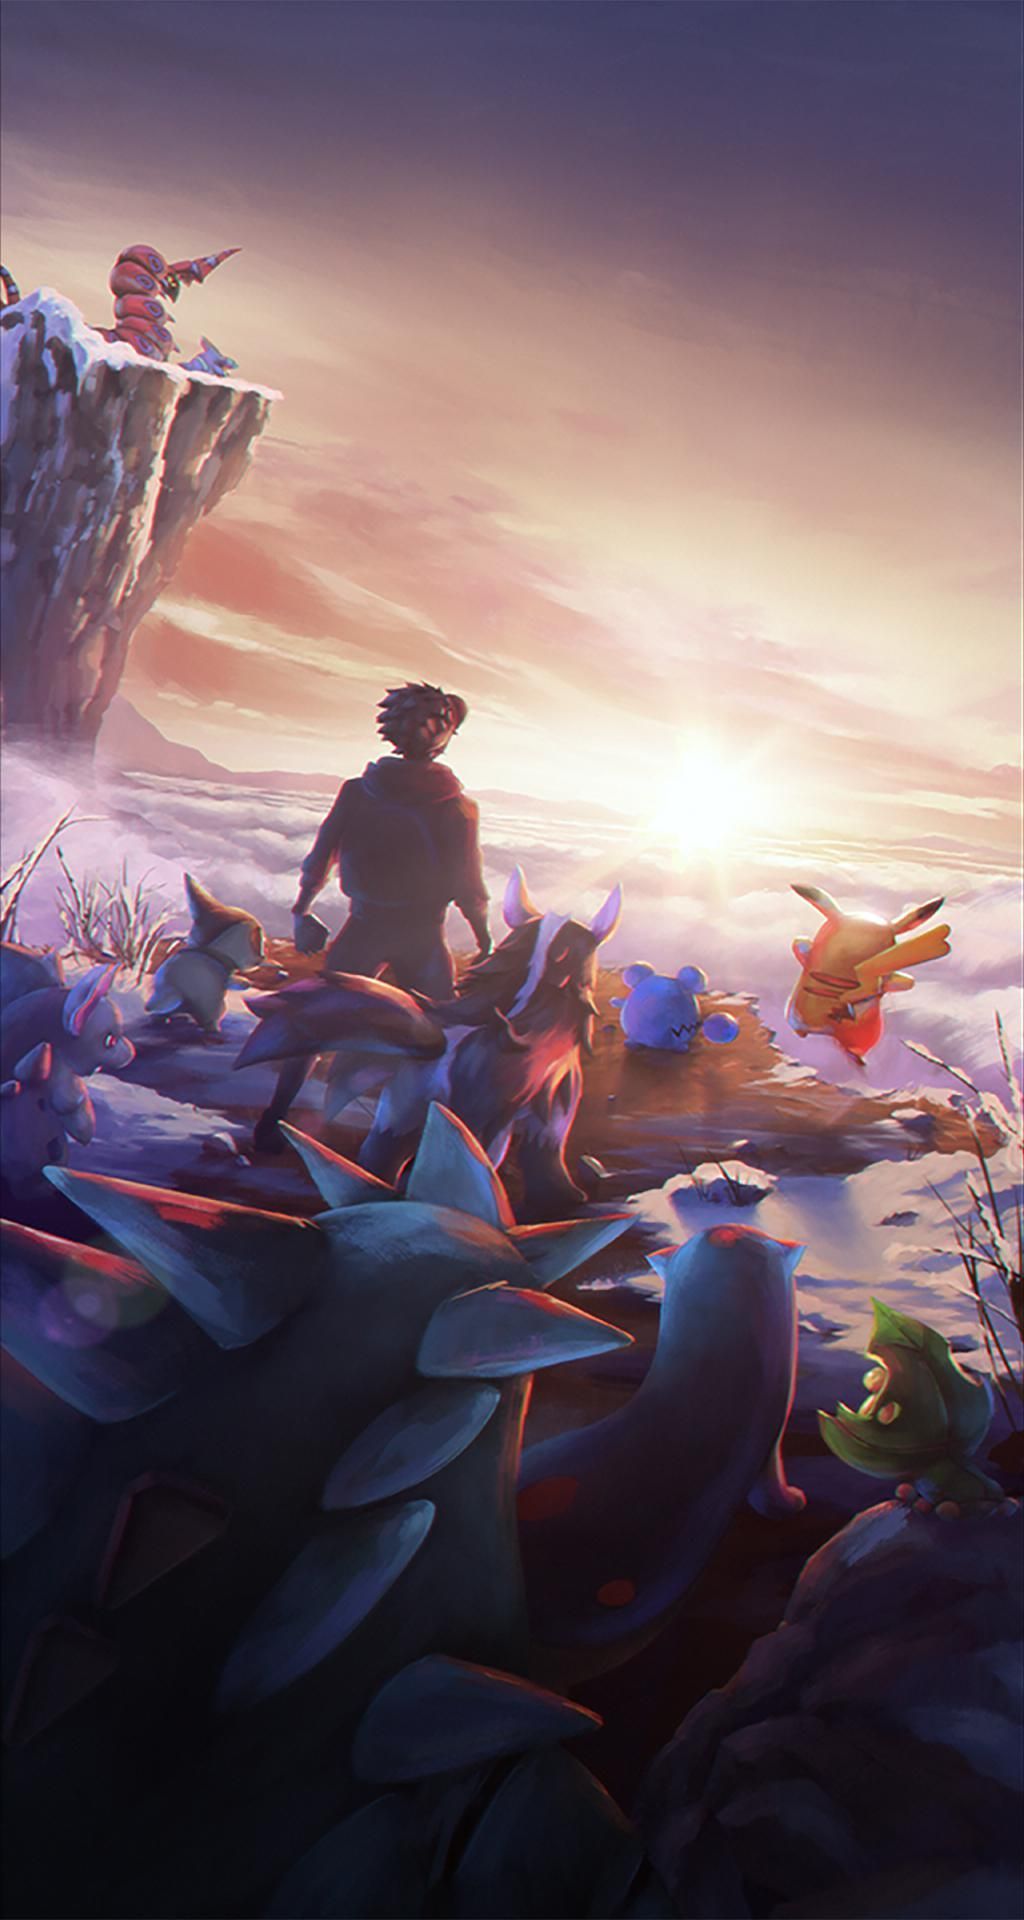 Pokémon GO data miners have discovered a new loading screen (pictured above), hidden among the files Pok. Pokemon, Cool pokemon wallpaper, Cute pokemon wallpaper